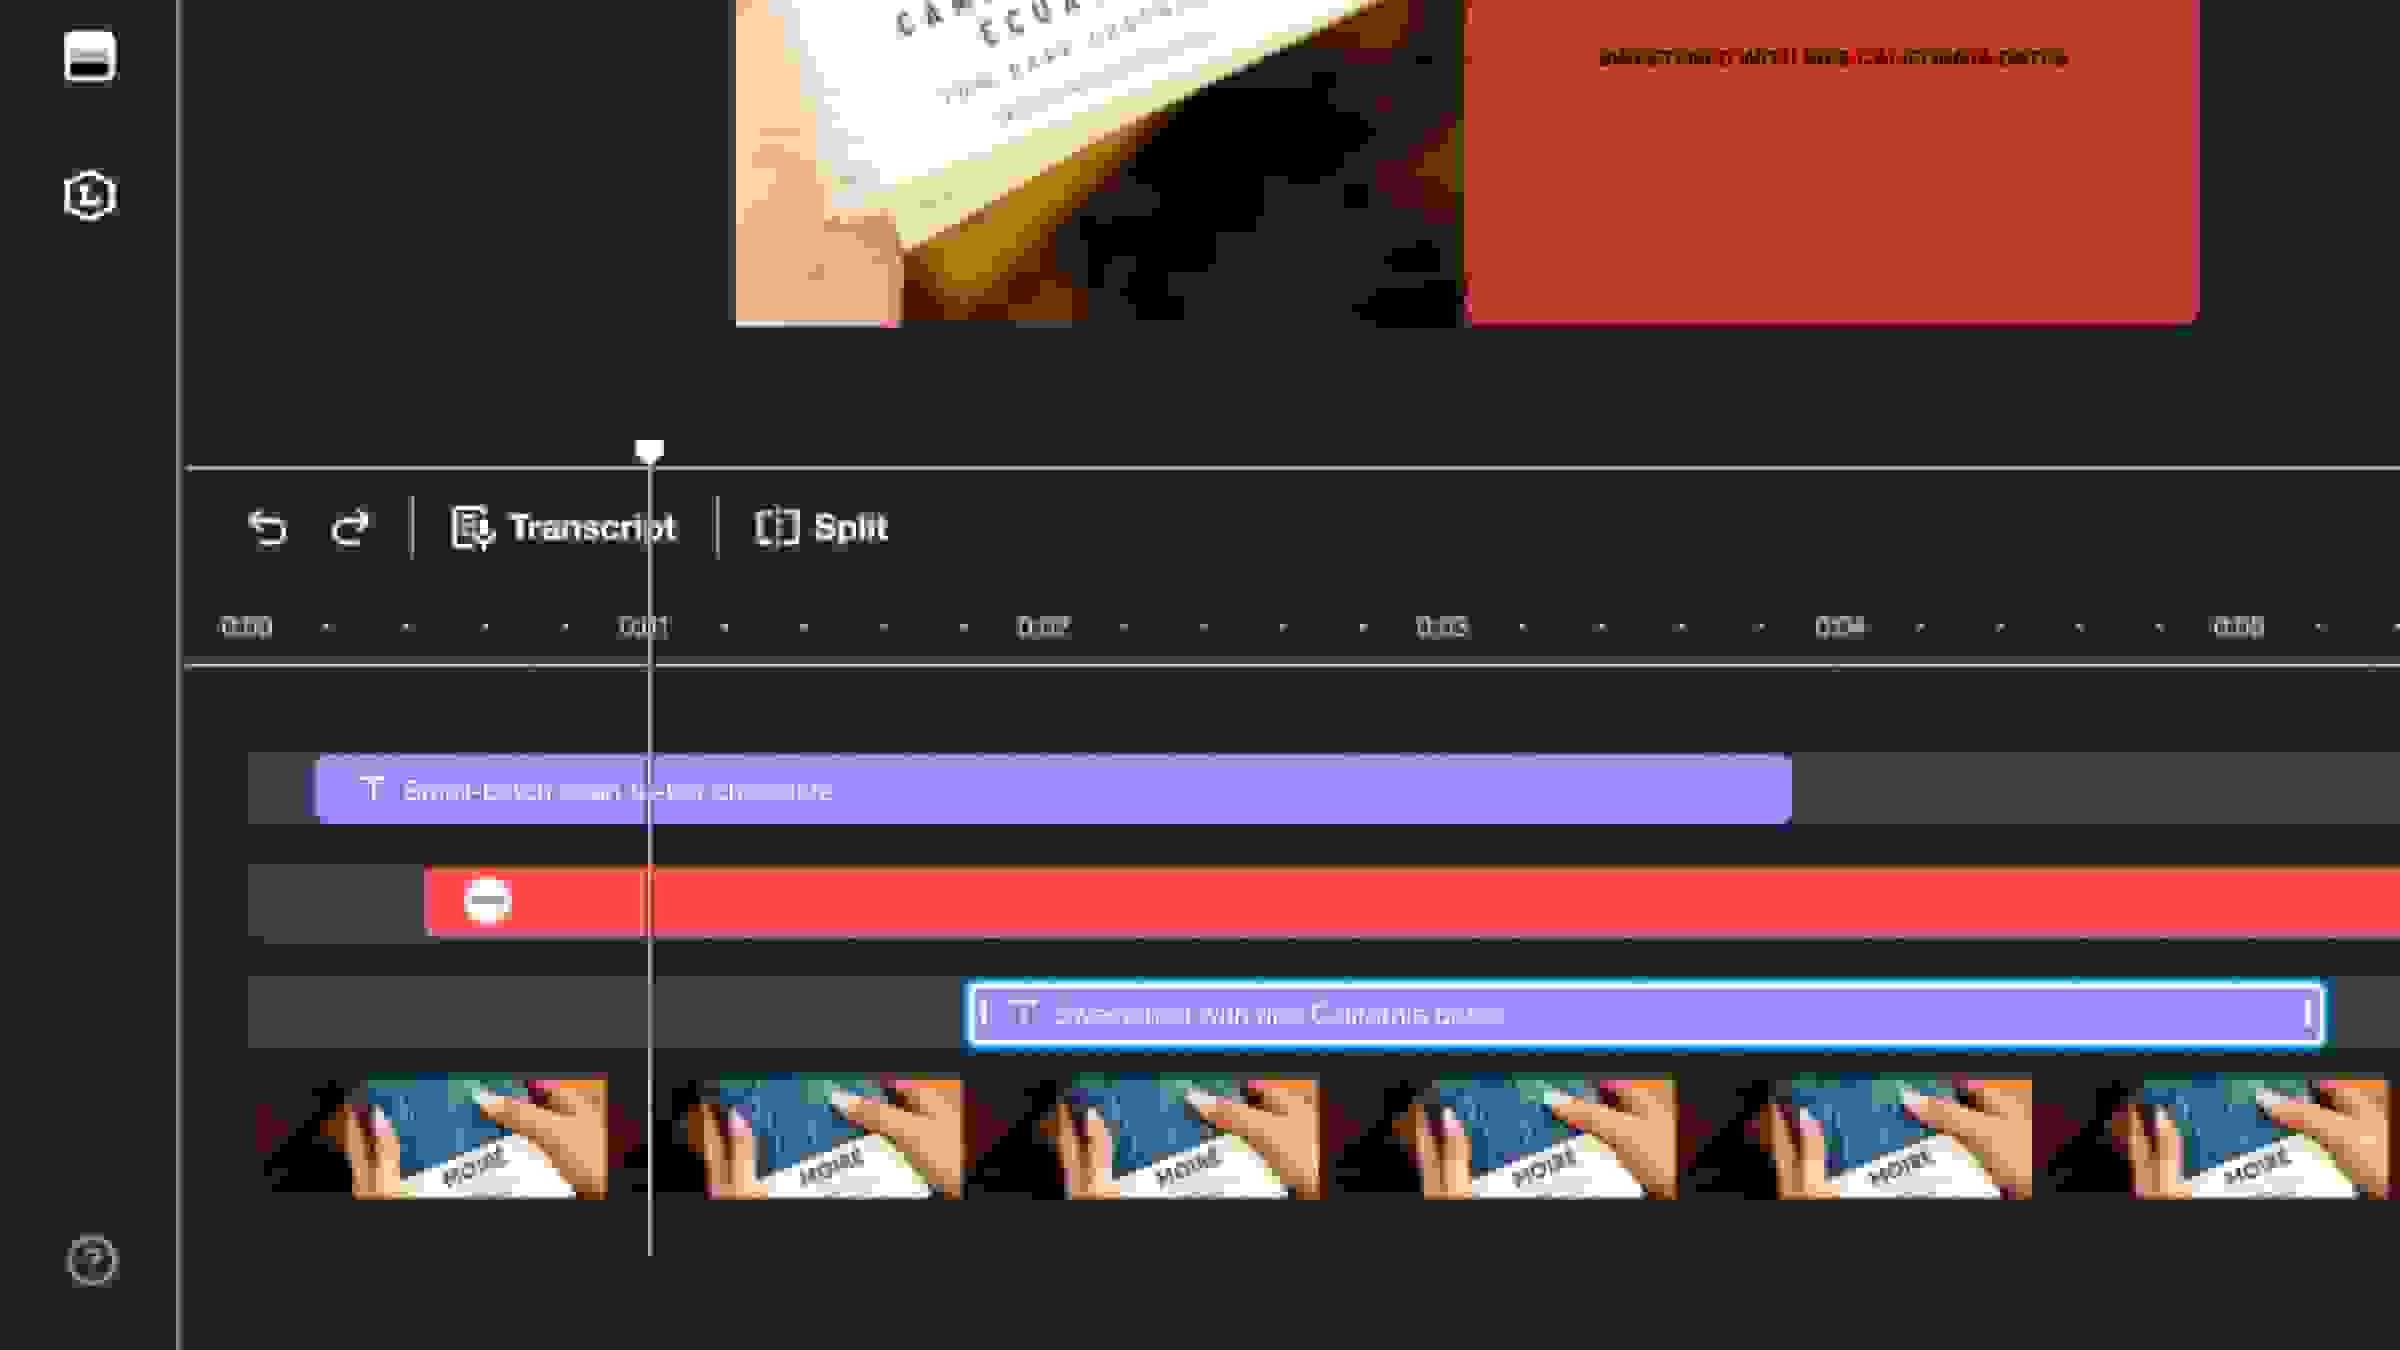 Vimeo timeline editor for video editing related to a company's video ad.